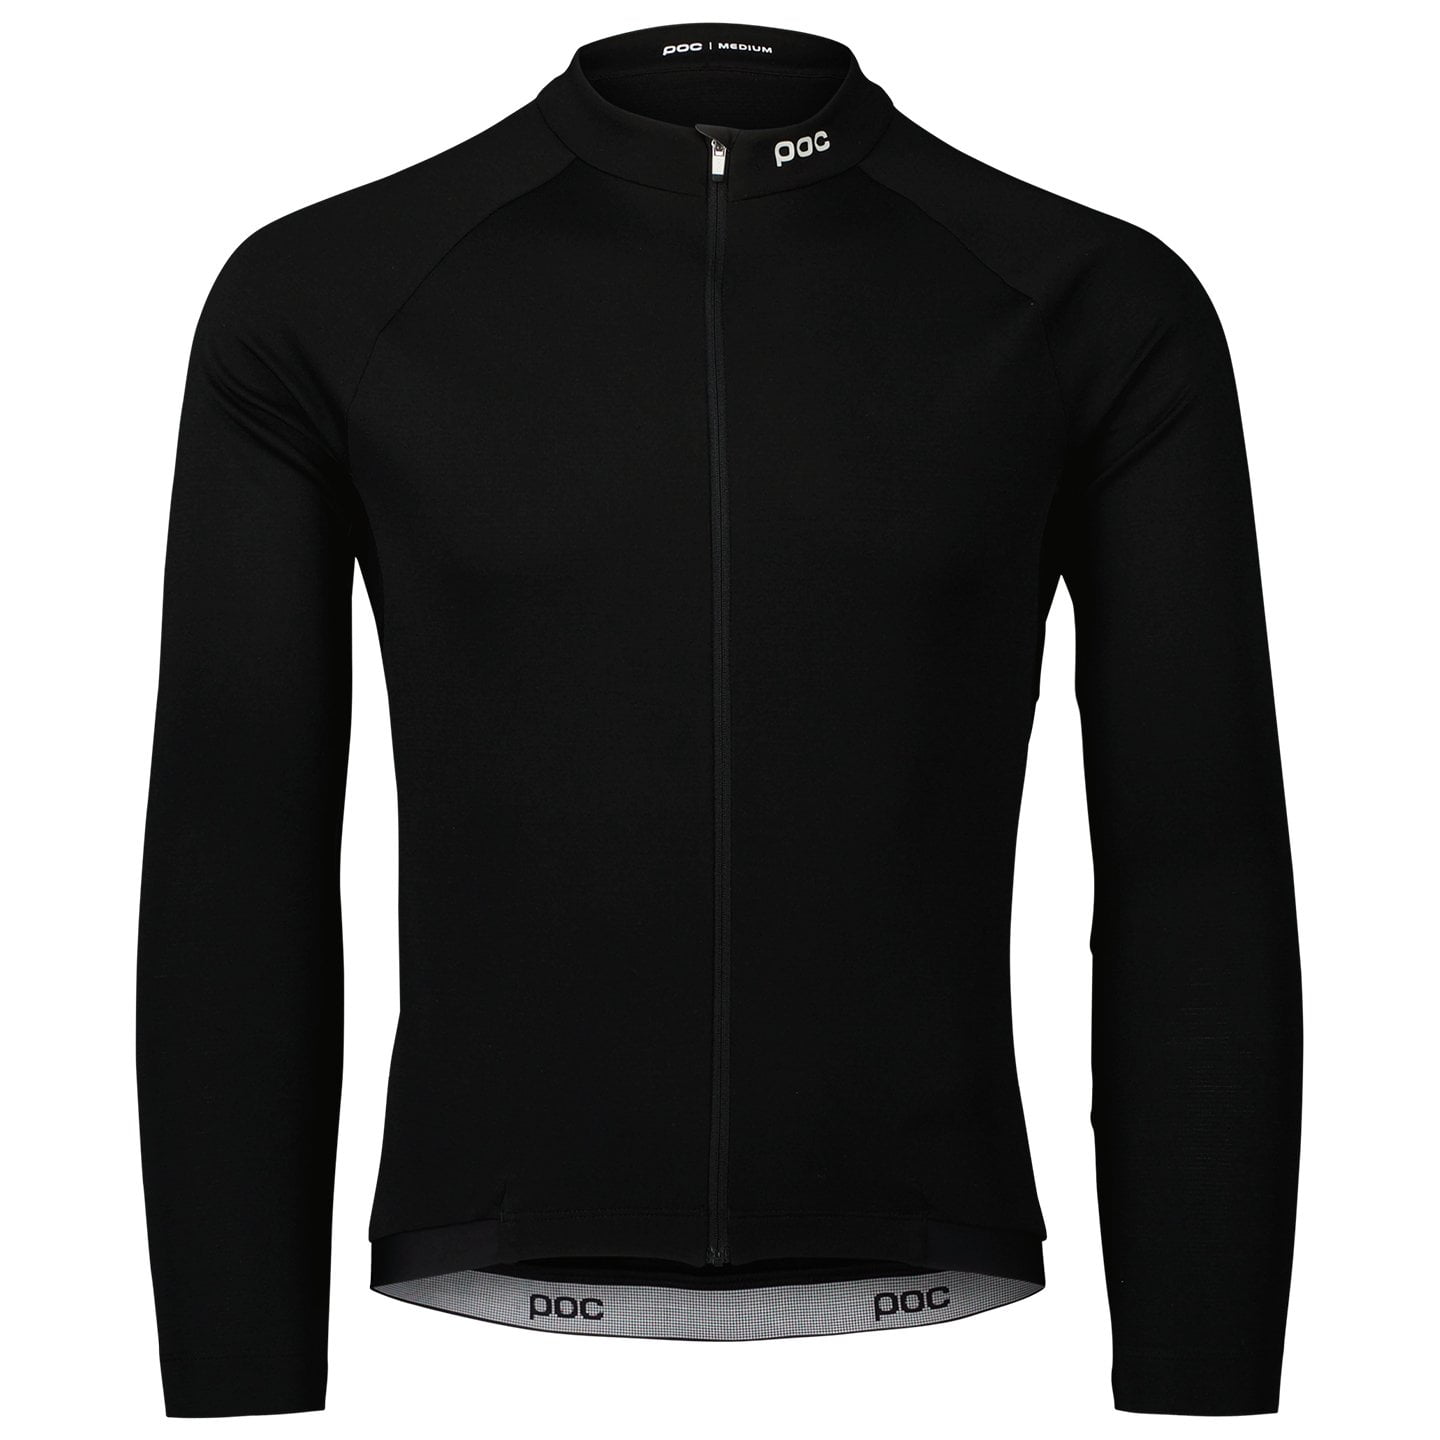 POC Thermal Lite Long Sleeve Jersey, for men, size XL, Cycling jersey, Cycle clothing